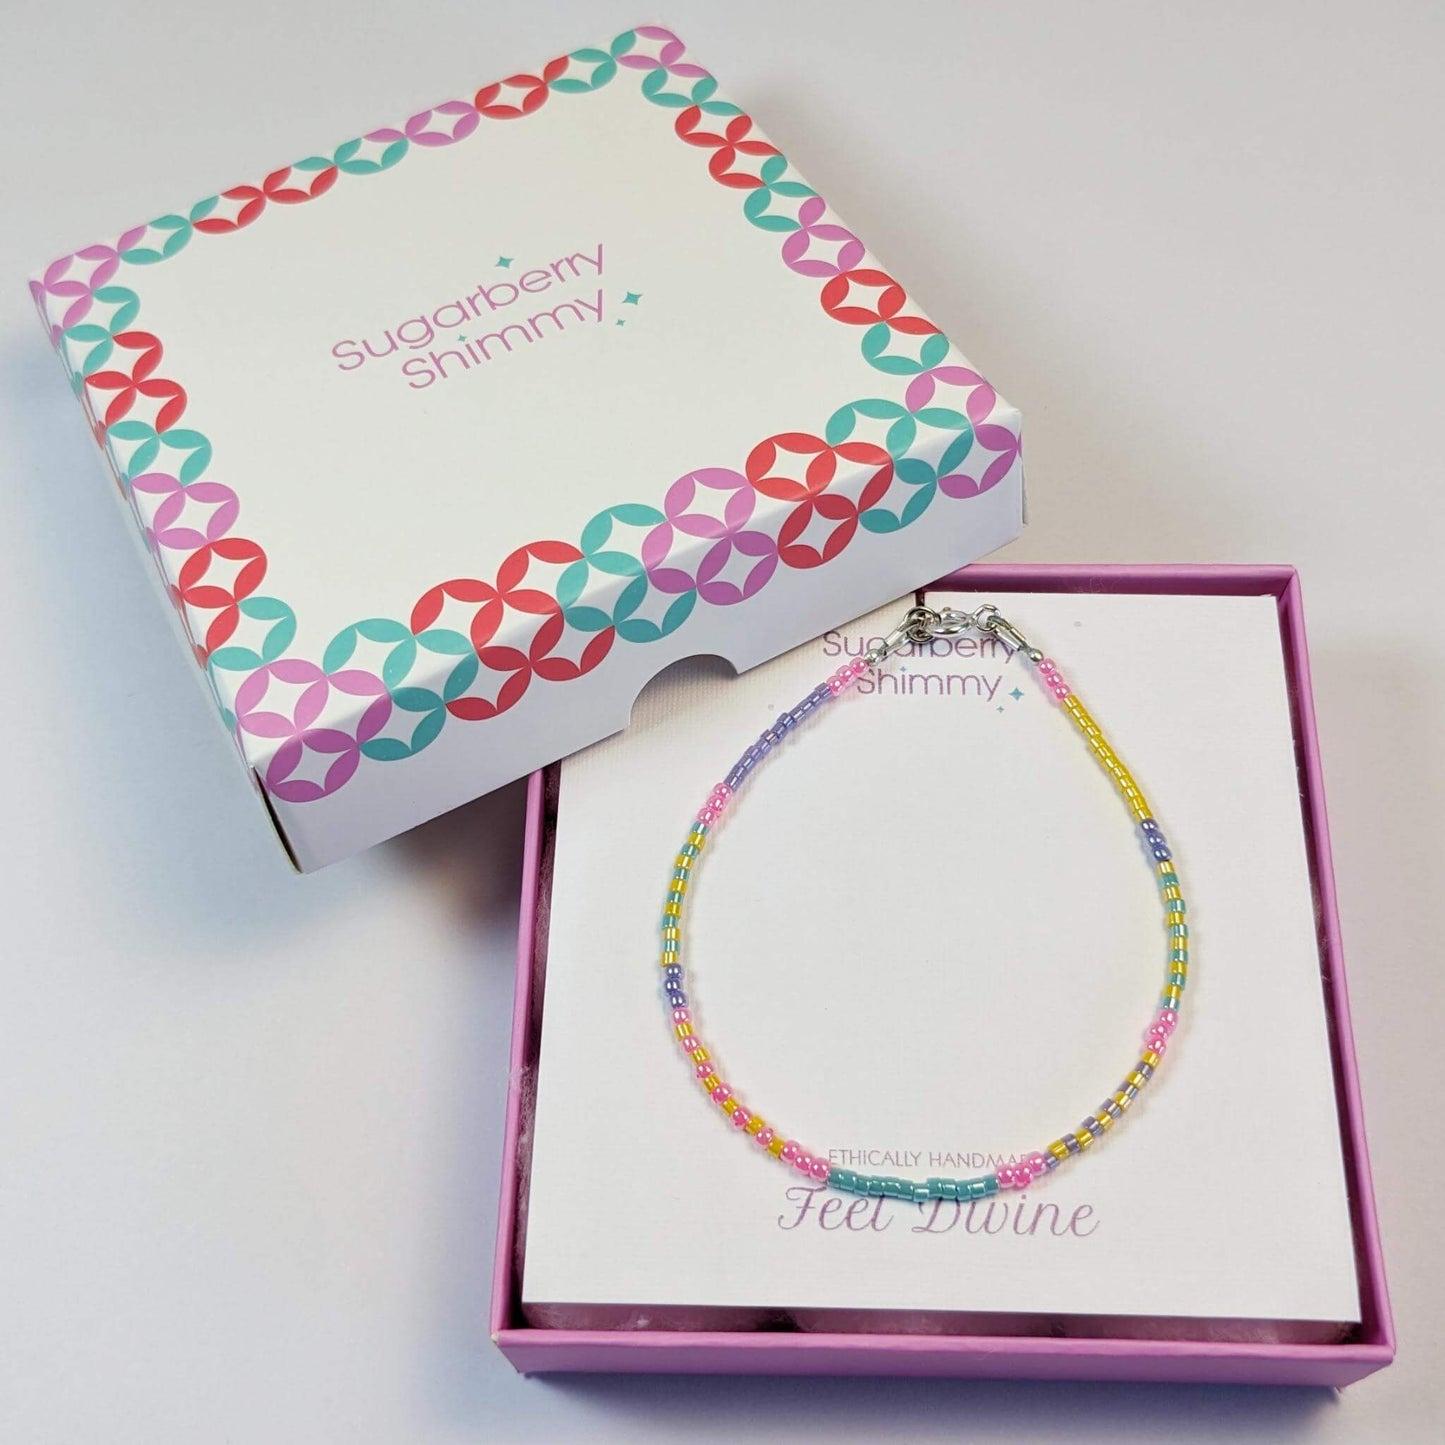 Colour Pop Beaded Stacking Bracelet in Silver